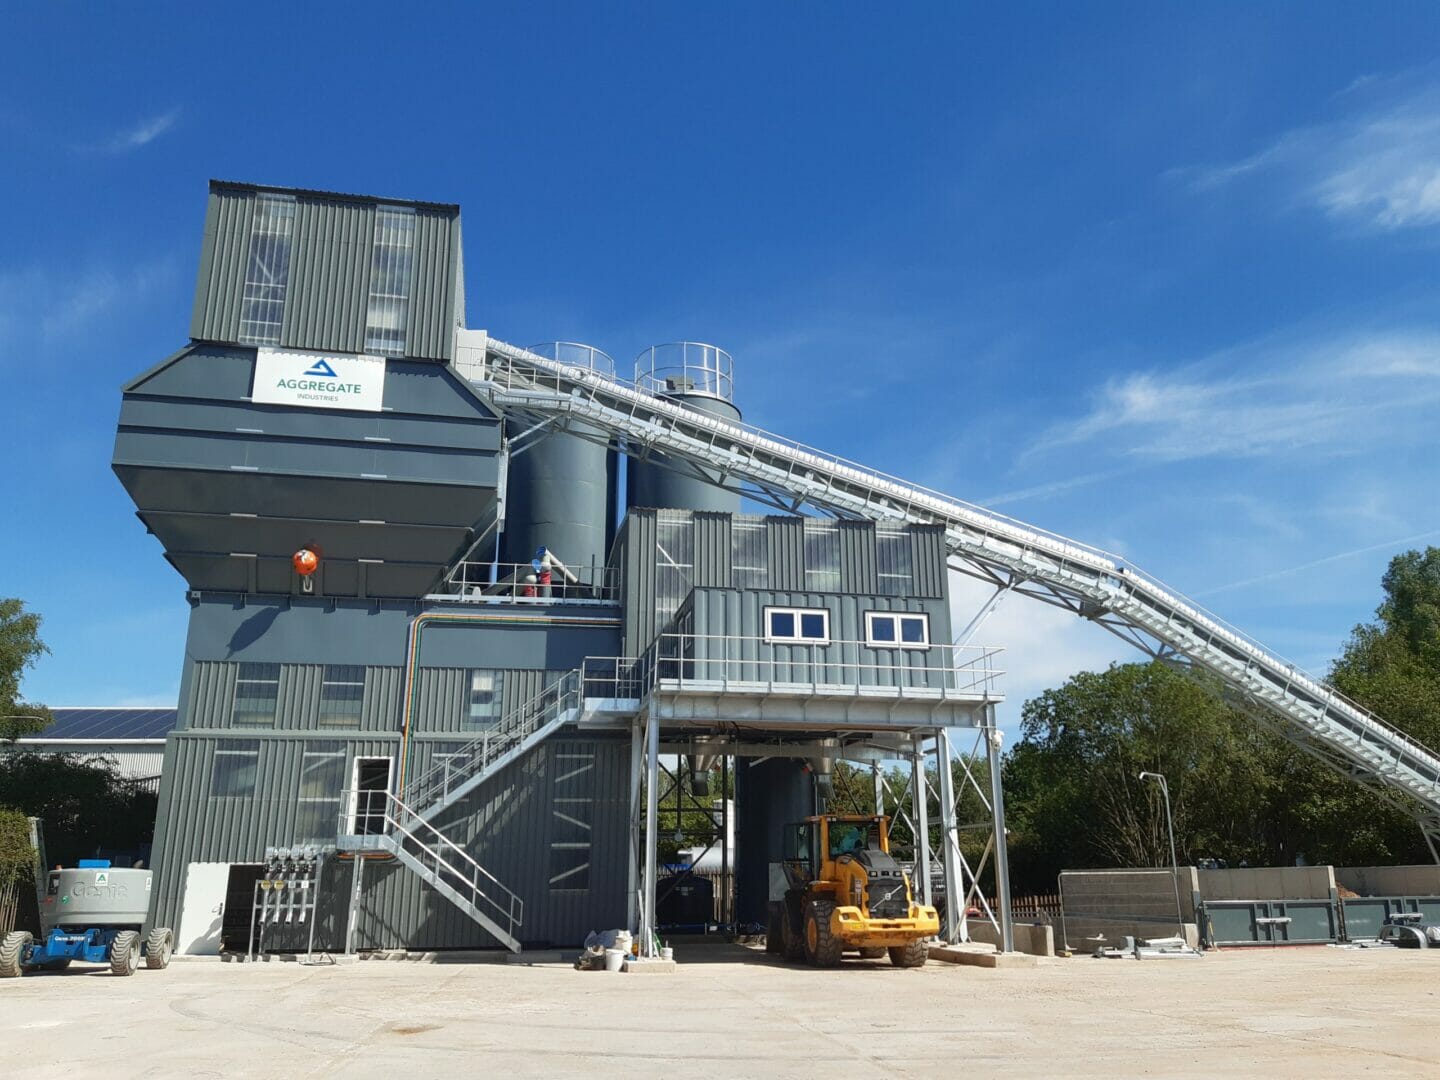 Aggregate Industries’ Opens New Coleshill RMX plant in West Midlands Expansion @AggregateUK